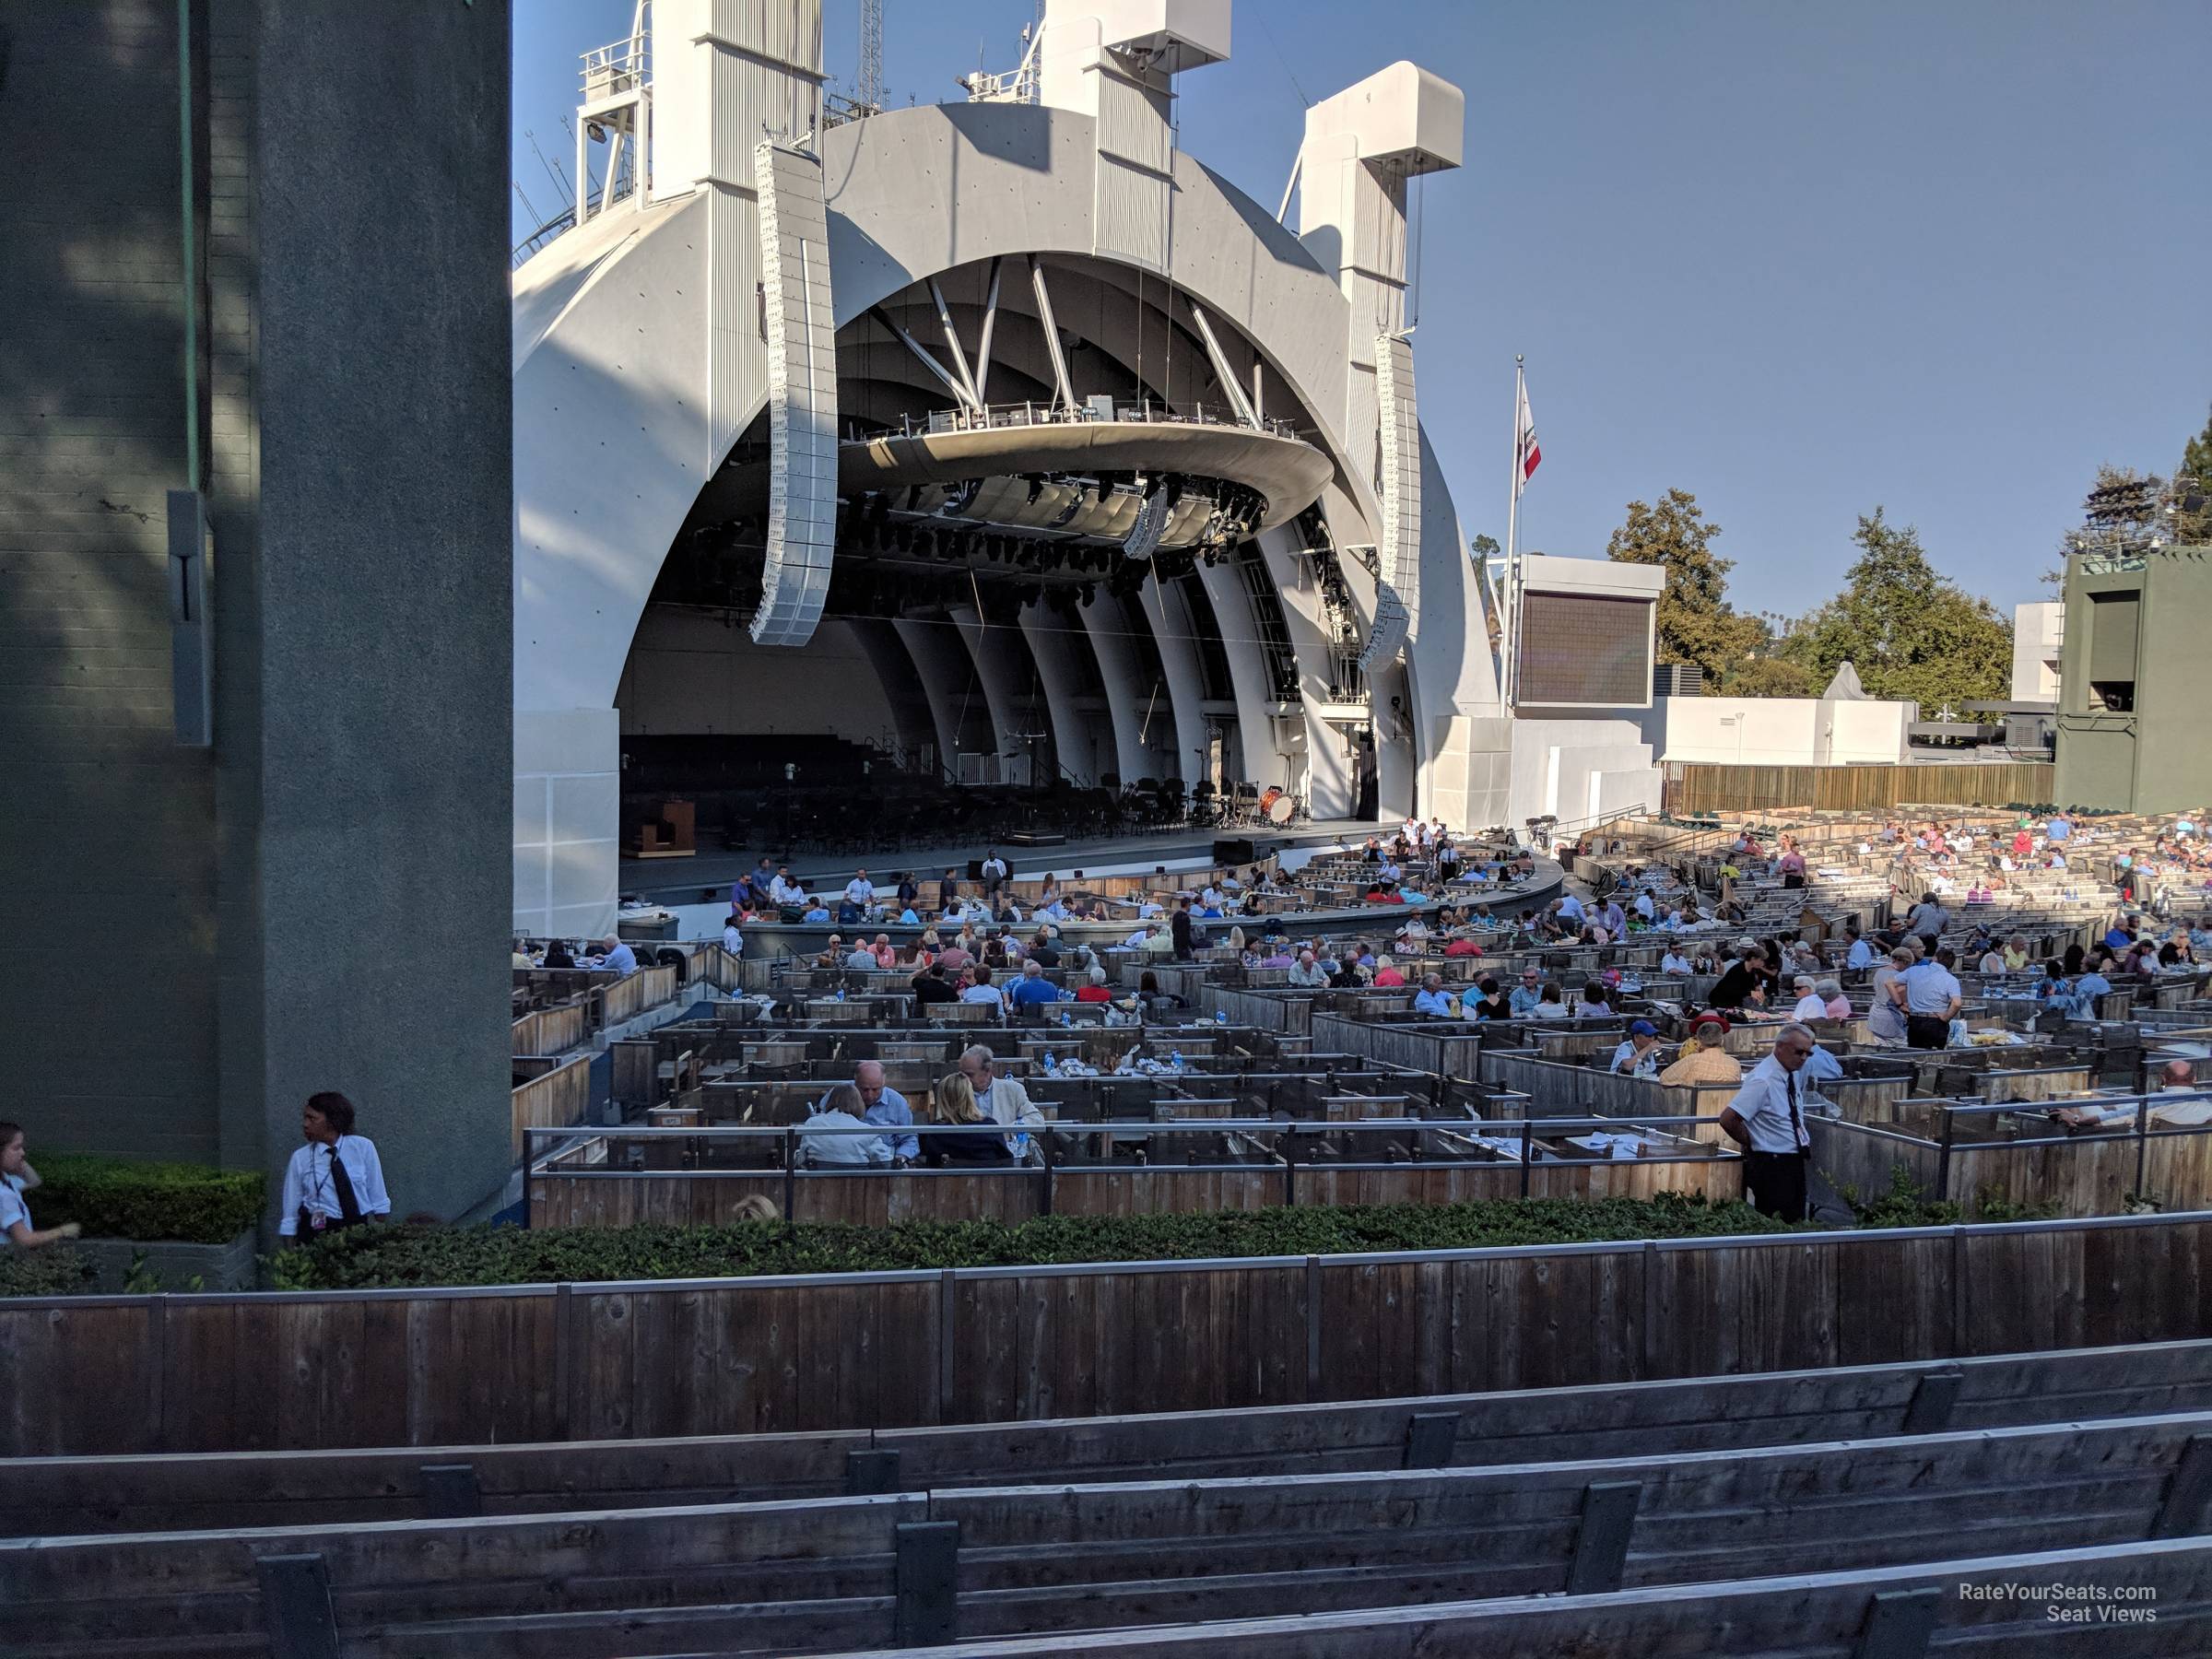 Hollywood Bowl Section E - RateYourSeats.com